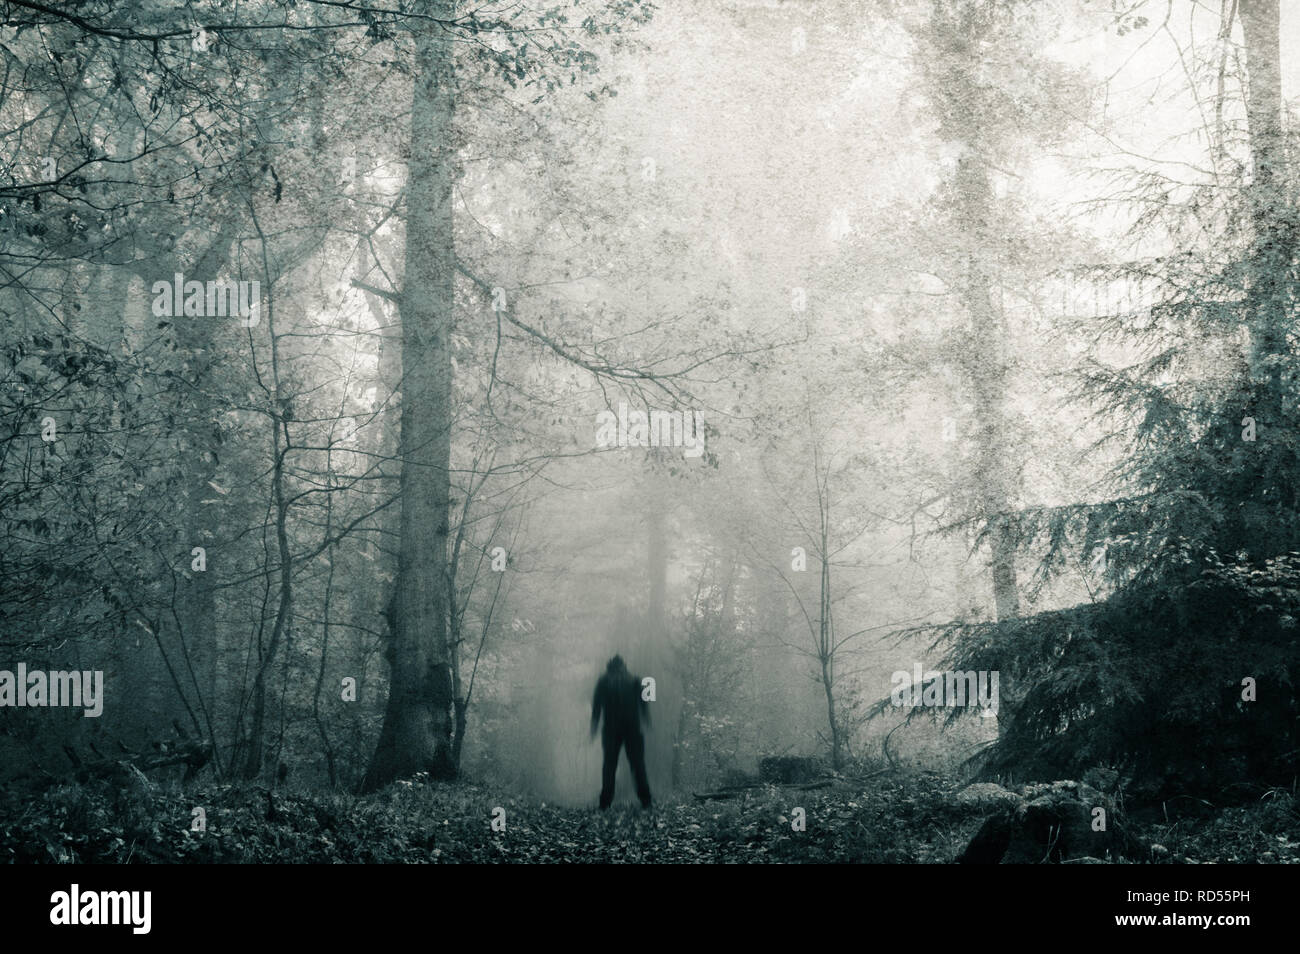 A lone blurred sinister hooded figure on a path in a dark, spooky forest in winter. With a blue, grunge, grainy edit. Stock Photo